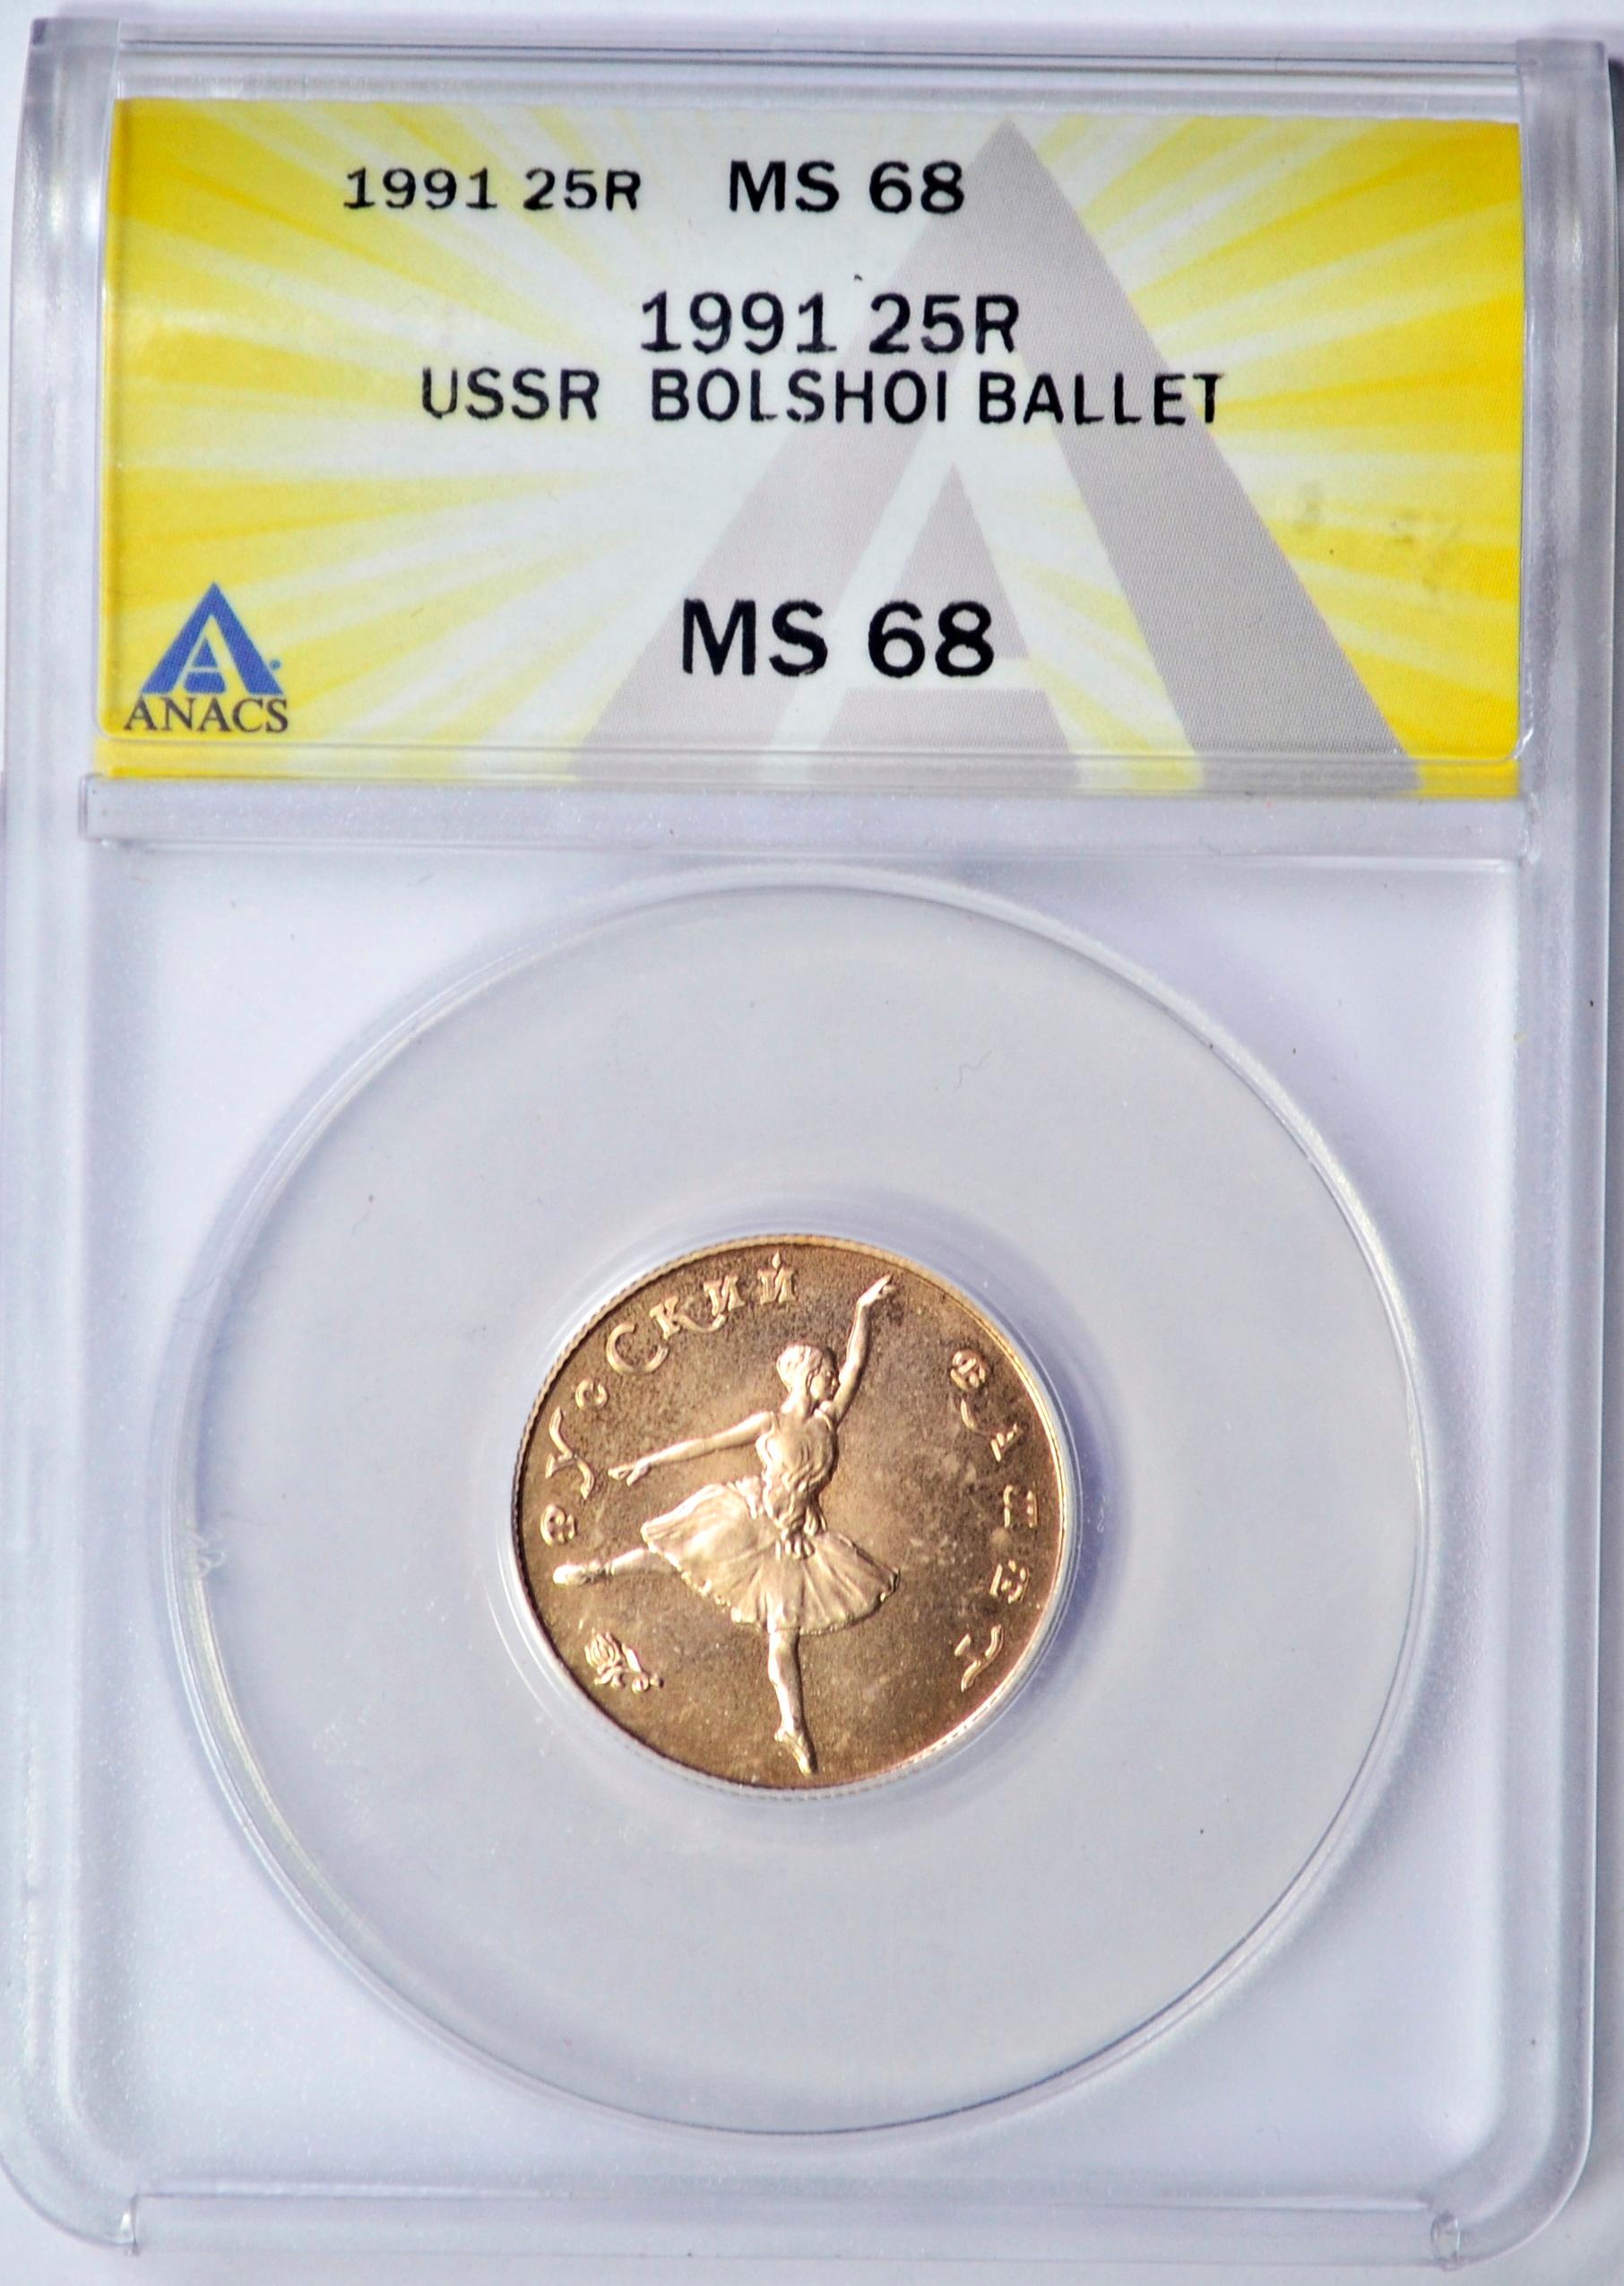 RUSSIA - 1991 25 ROUBLES BOLSHOI BALLET GOLD COIN - ANACS MS68